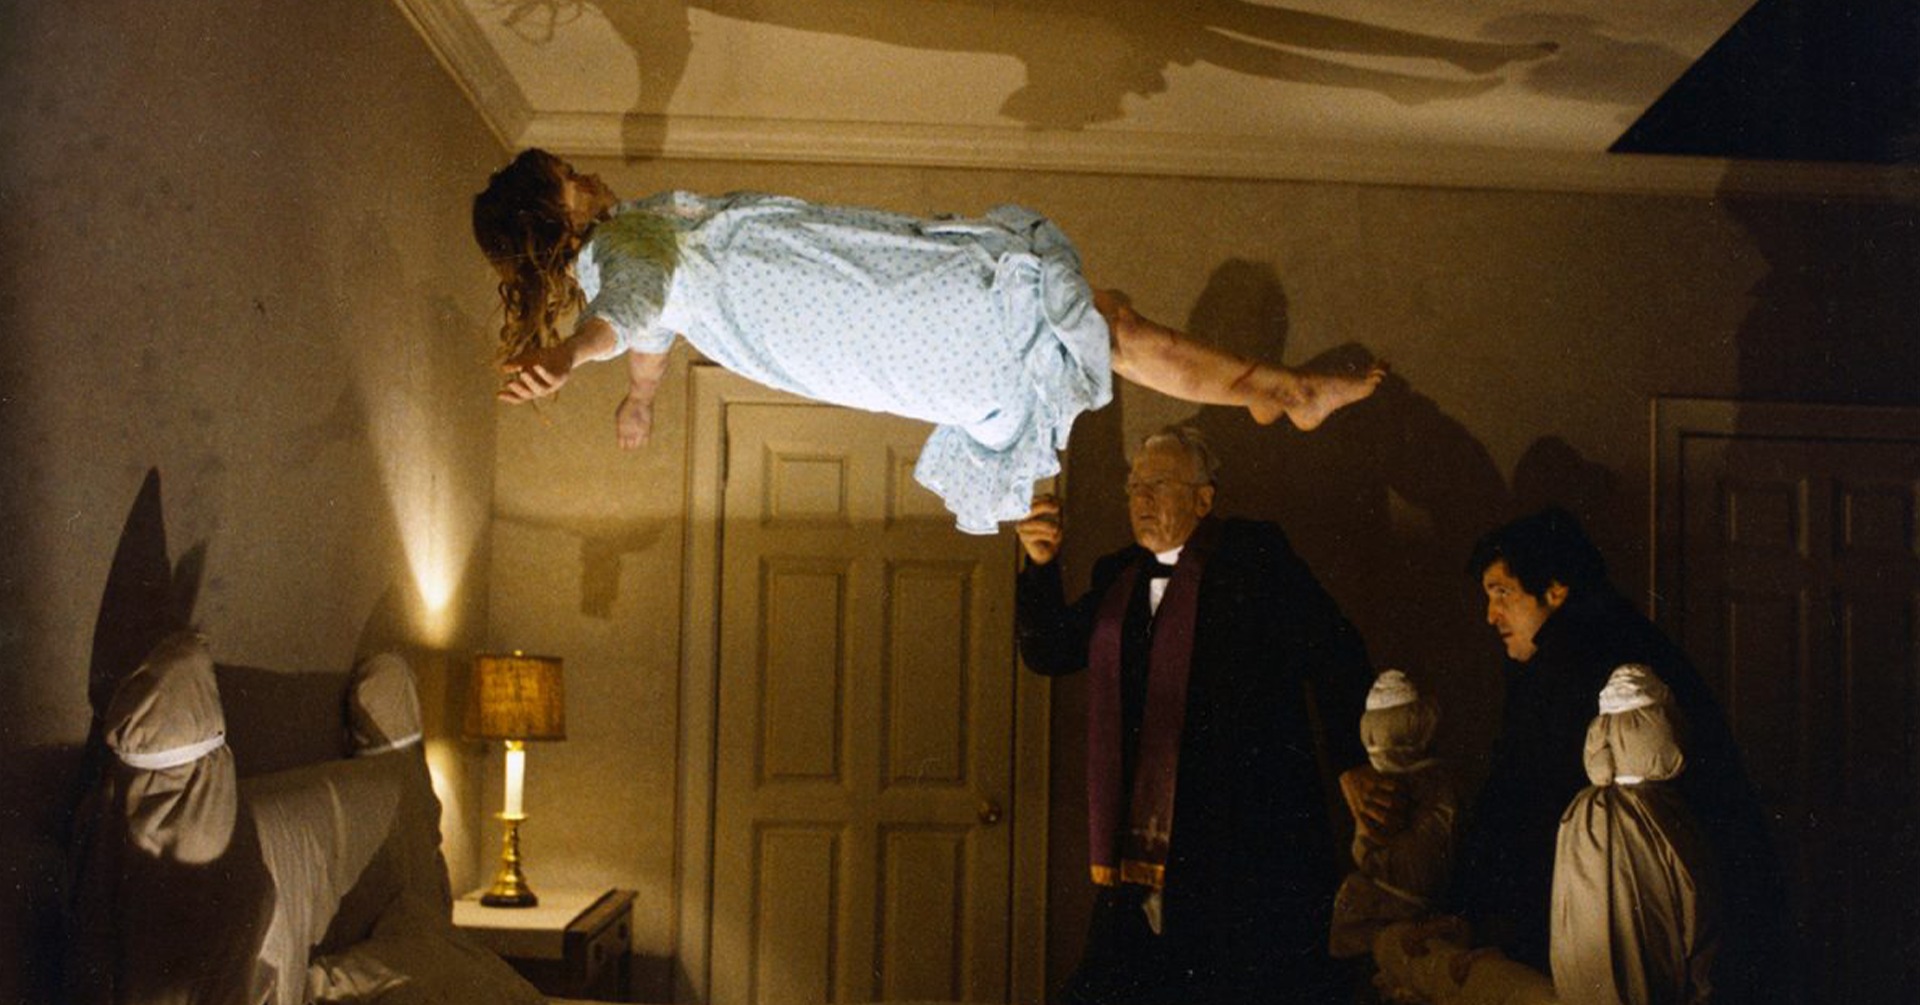 A screenshot from The Exorcist. A young girl in a nightgown is floating above her bed, with adults surrounding her.